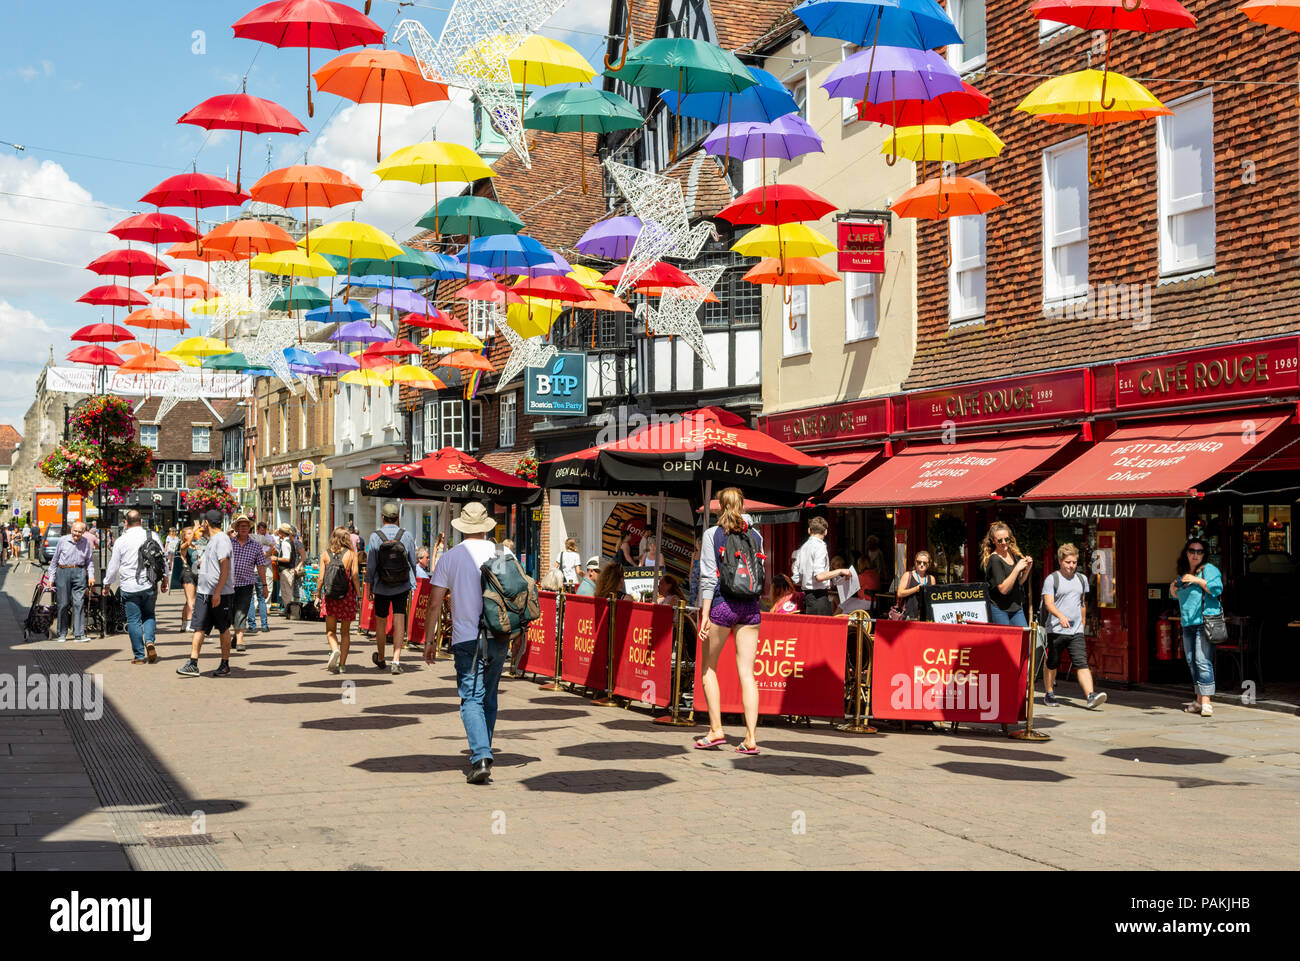 Salisbury, Wiltshire, UK, 24th July 2018, Weather: Hot and sunny in the cathedral city with temperatures edging towards 30 degrees. A colourful umbrella art installation casts octagonal shadows on the High Street. Stock Photo